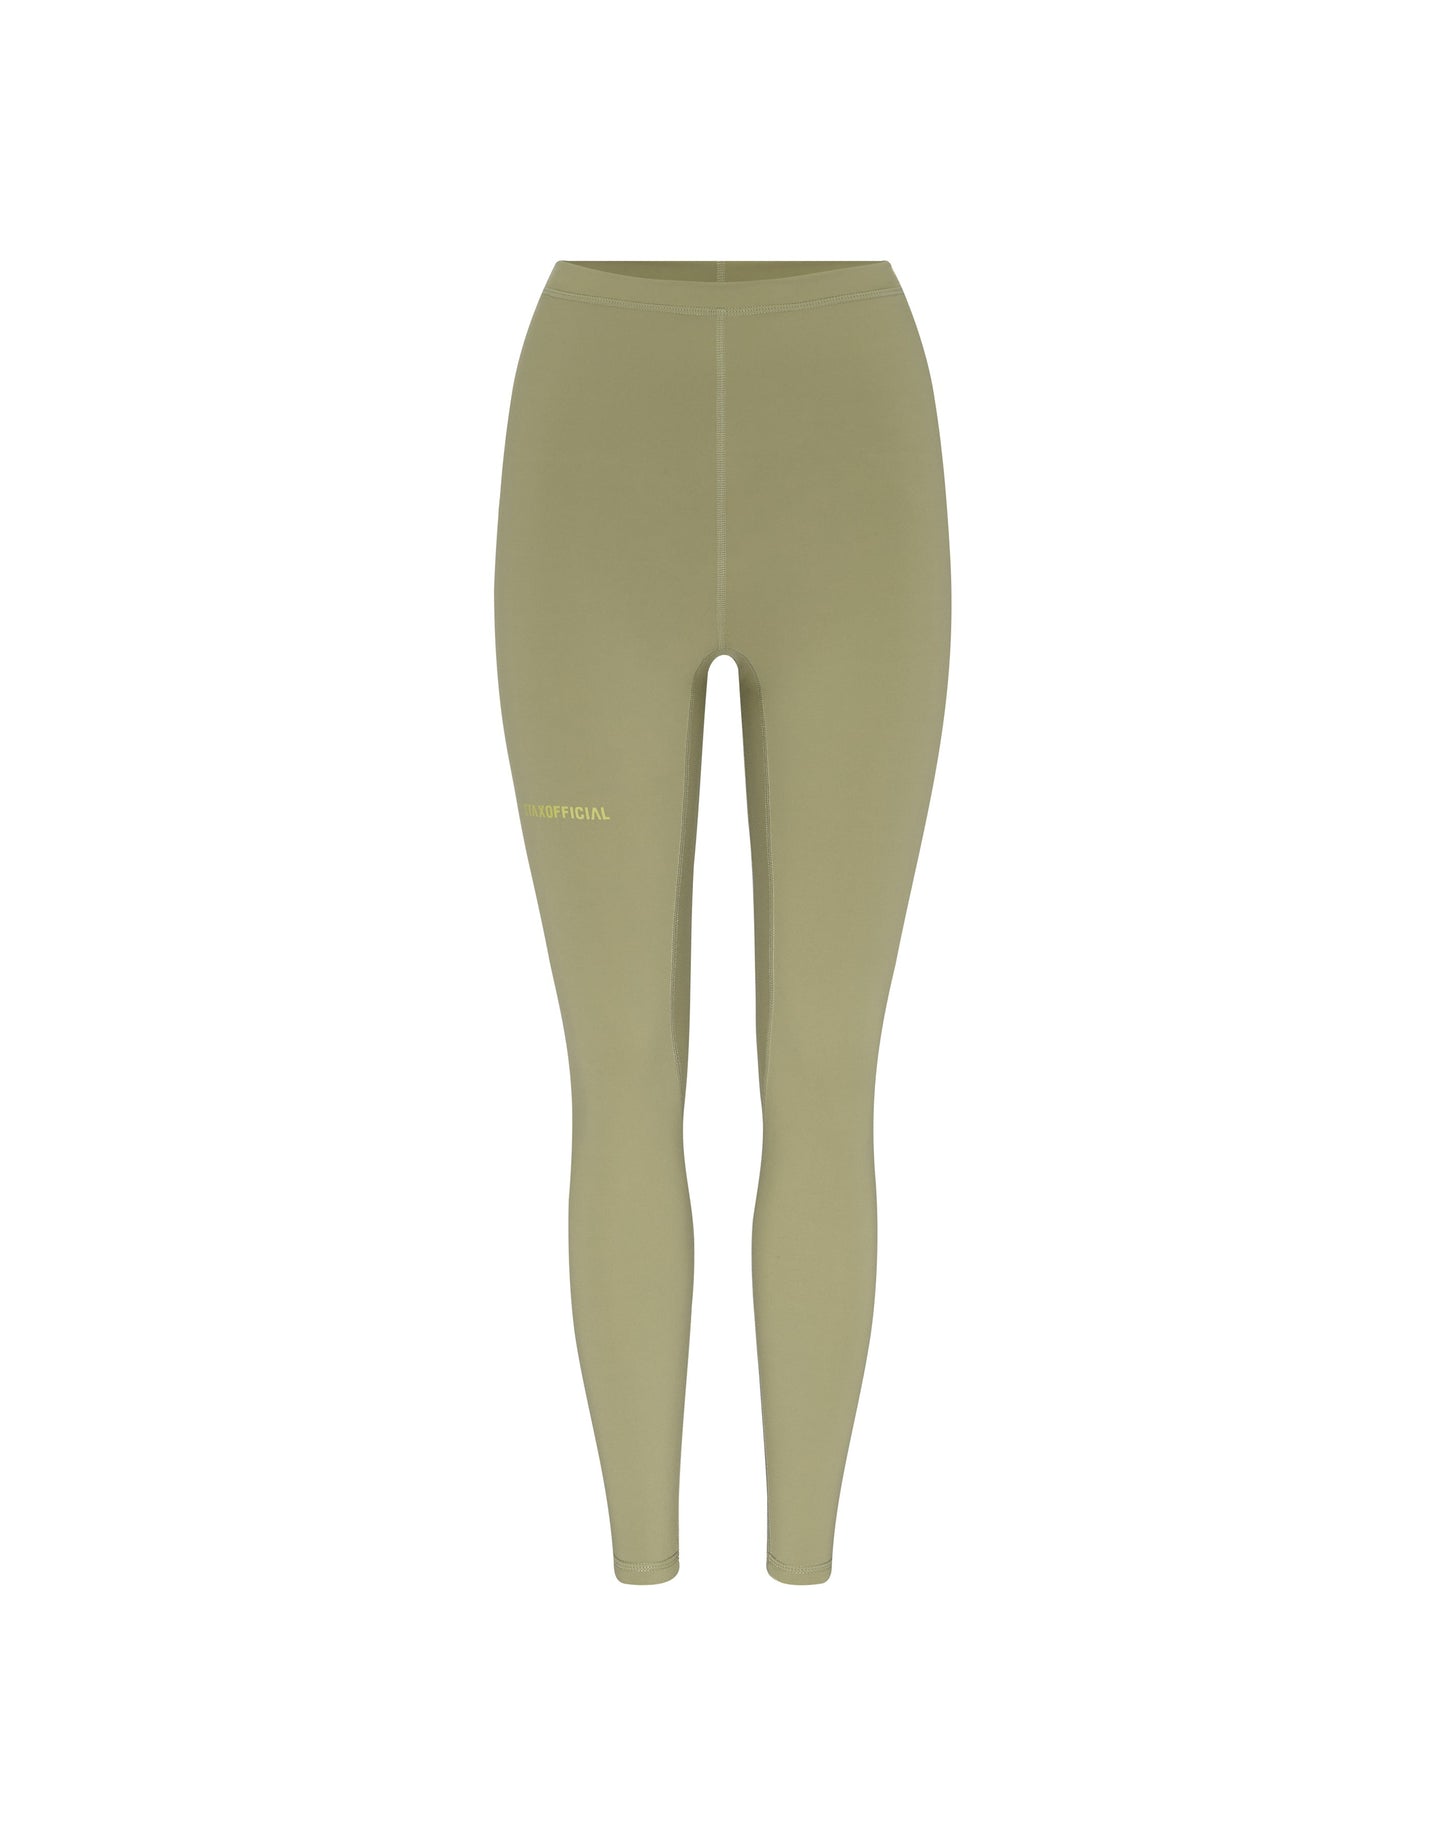 STAX. AW Tights - Olive (Creo)